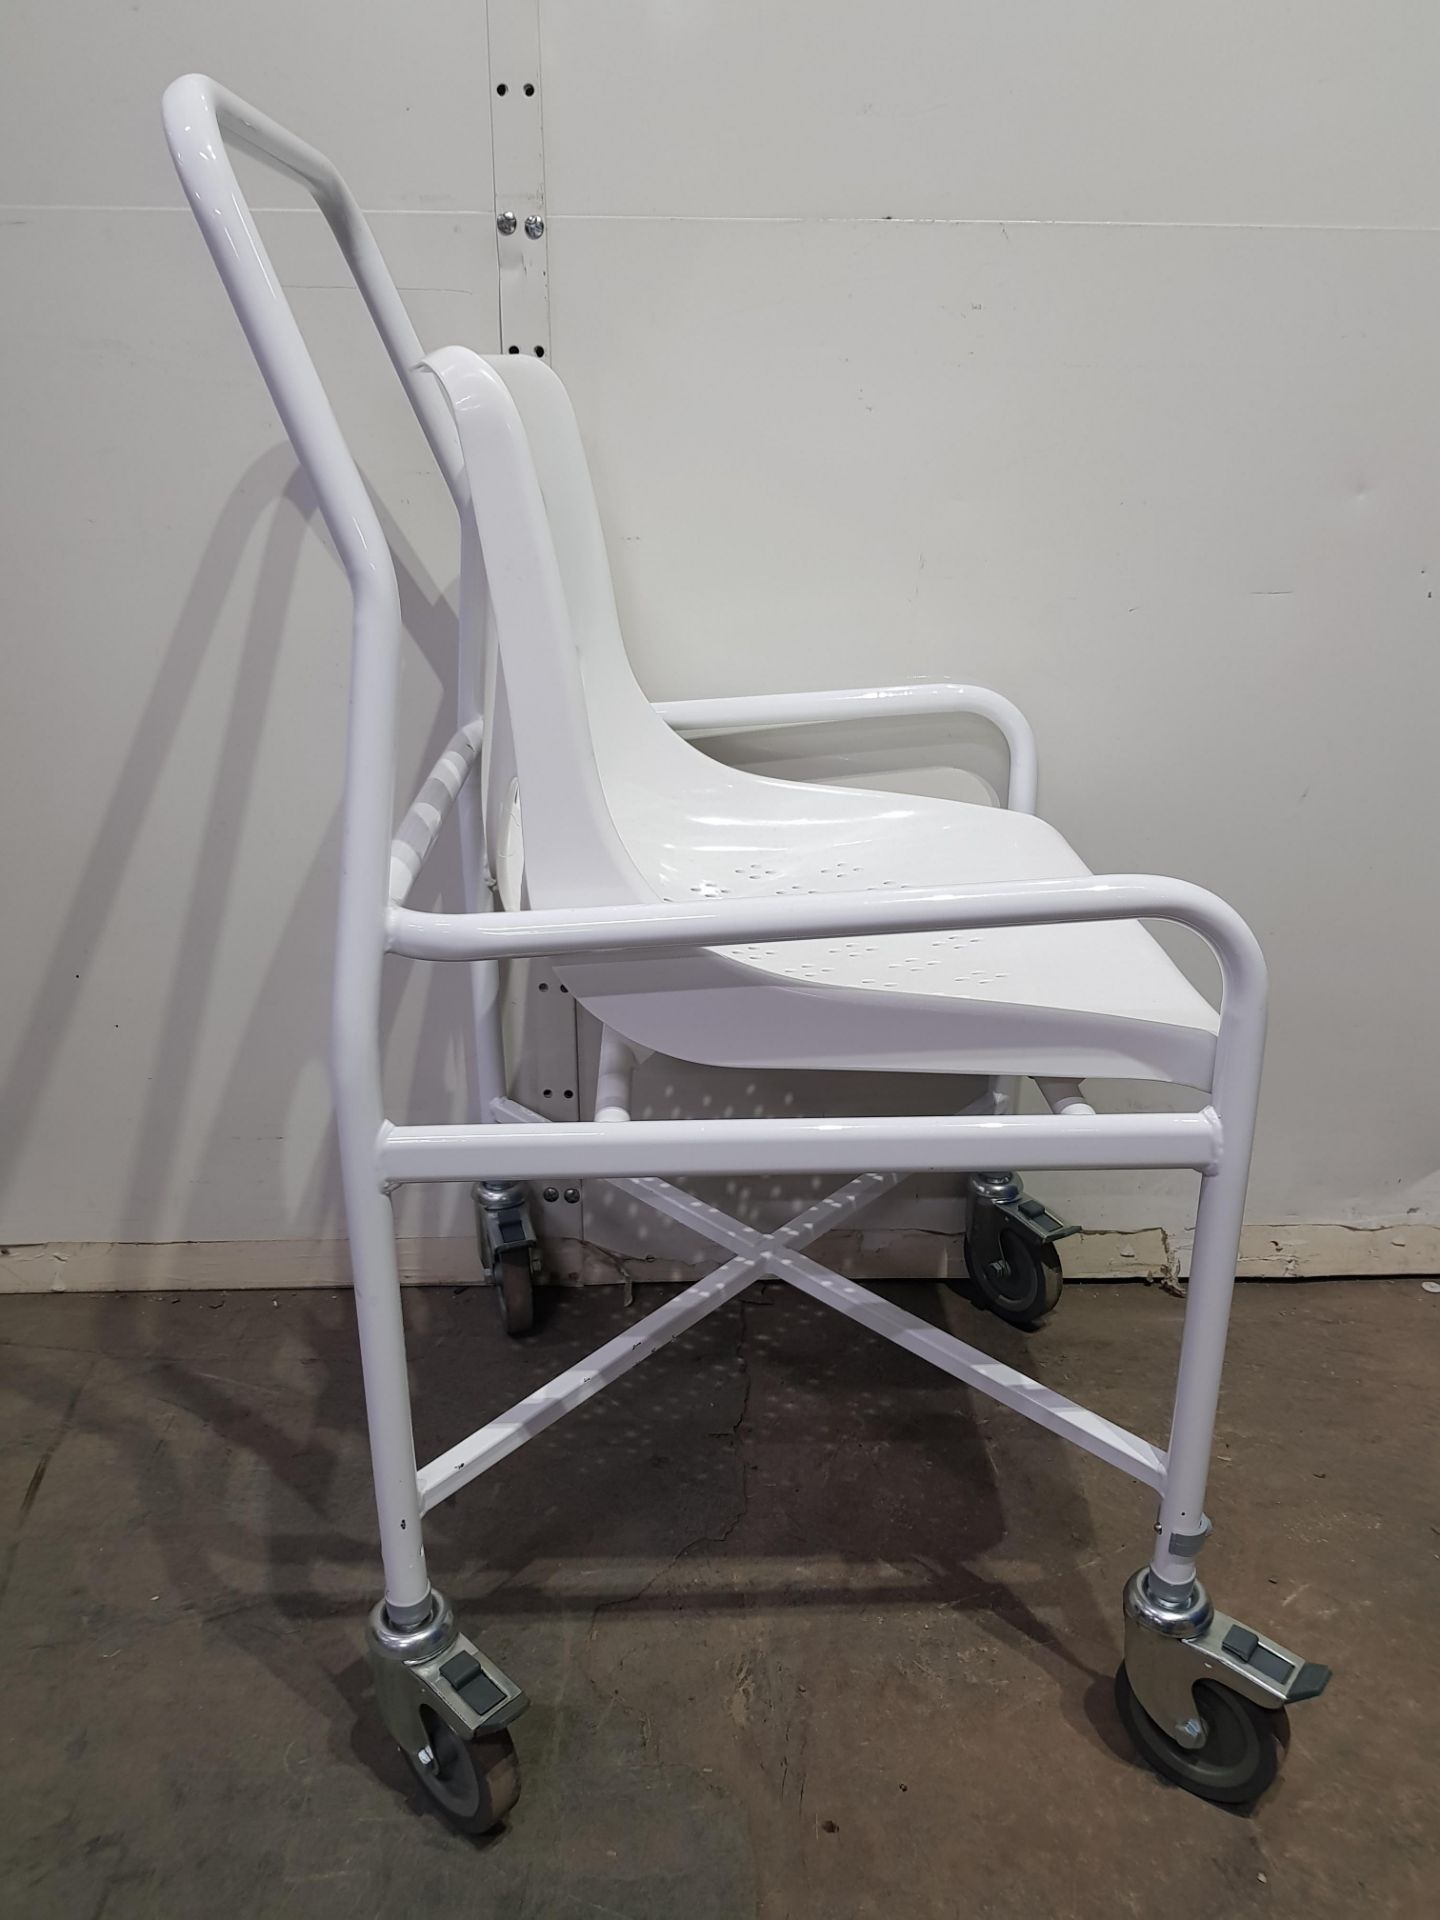 Cefindy Shower Chair Height Adjustable - Image 2 of 3